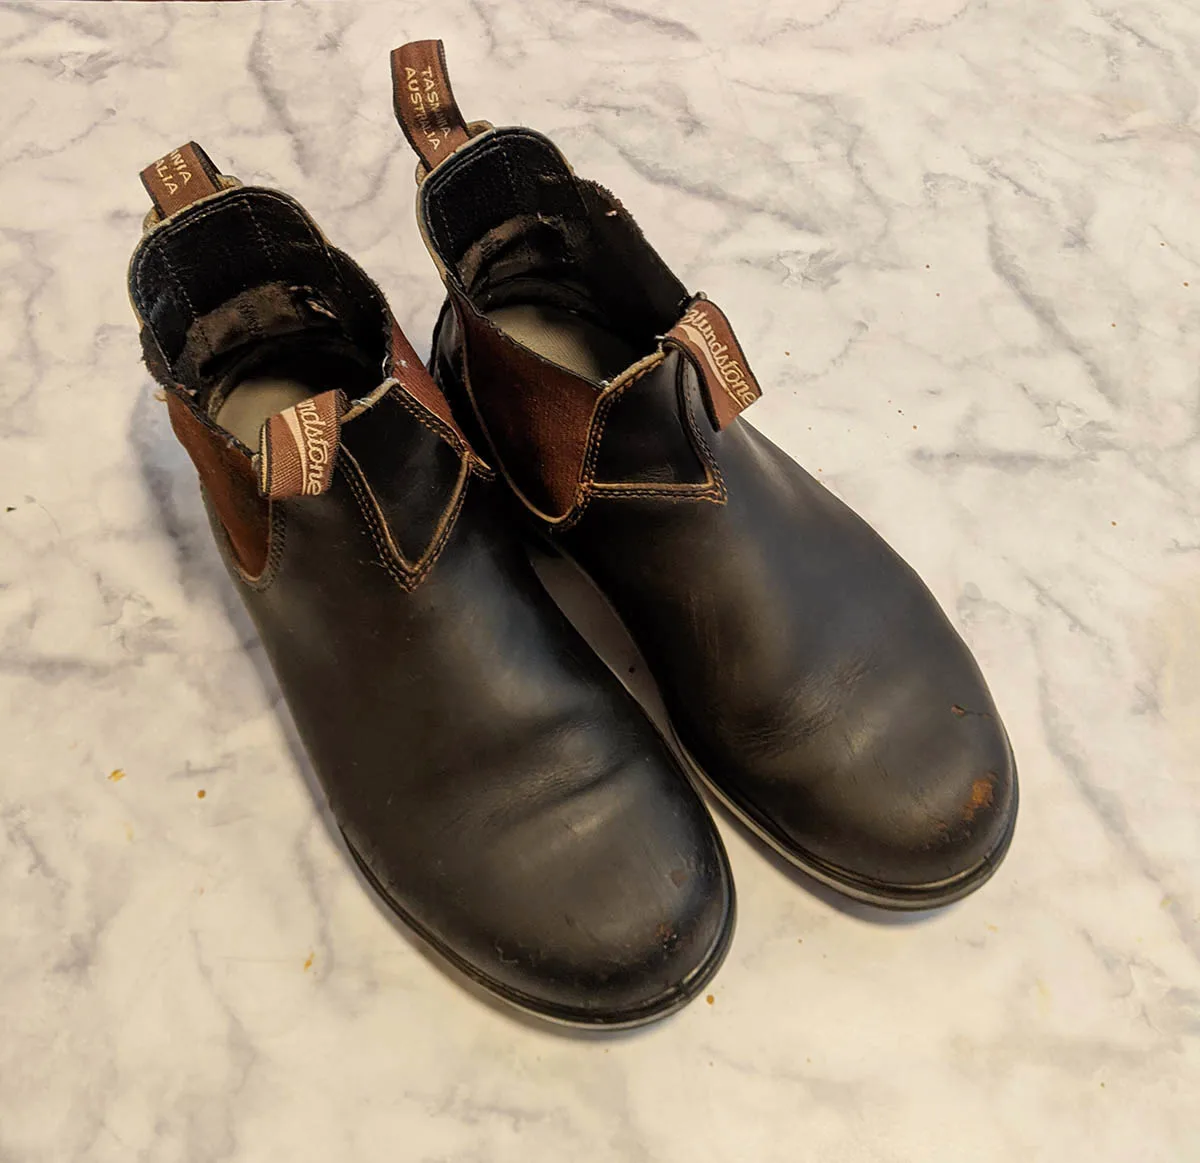  anyone can restore a scuffed pair of boots using these tips